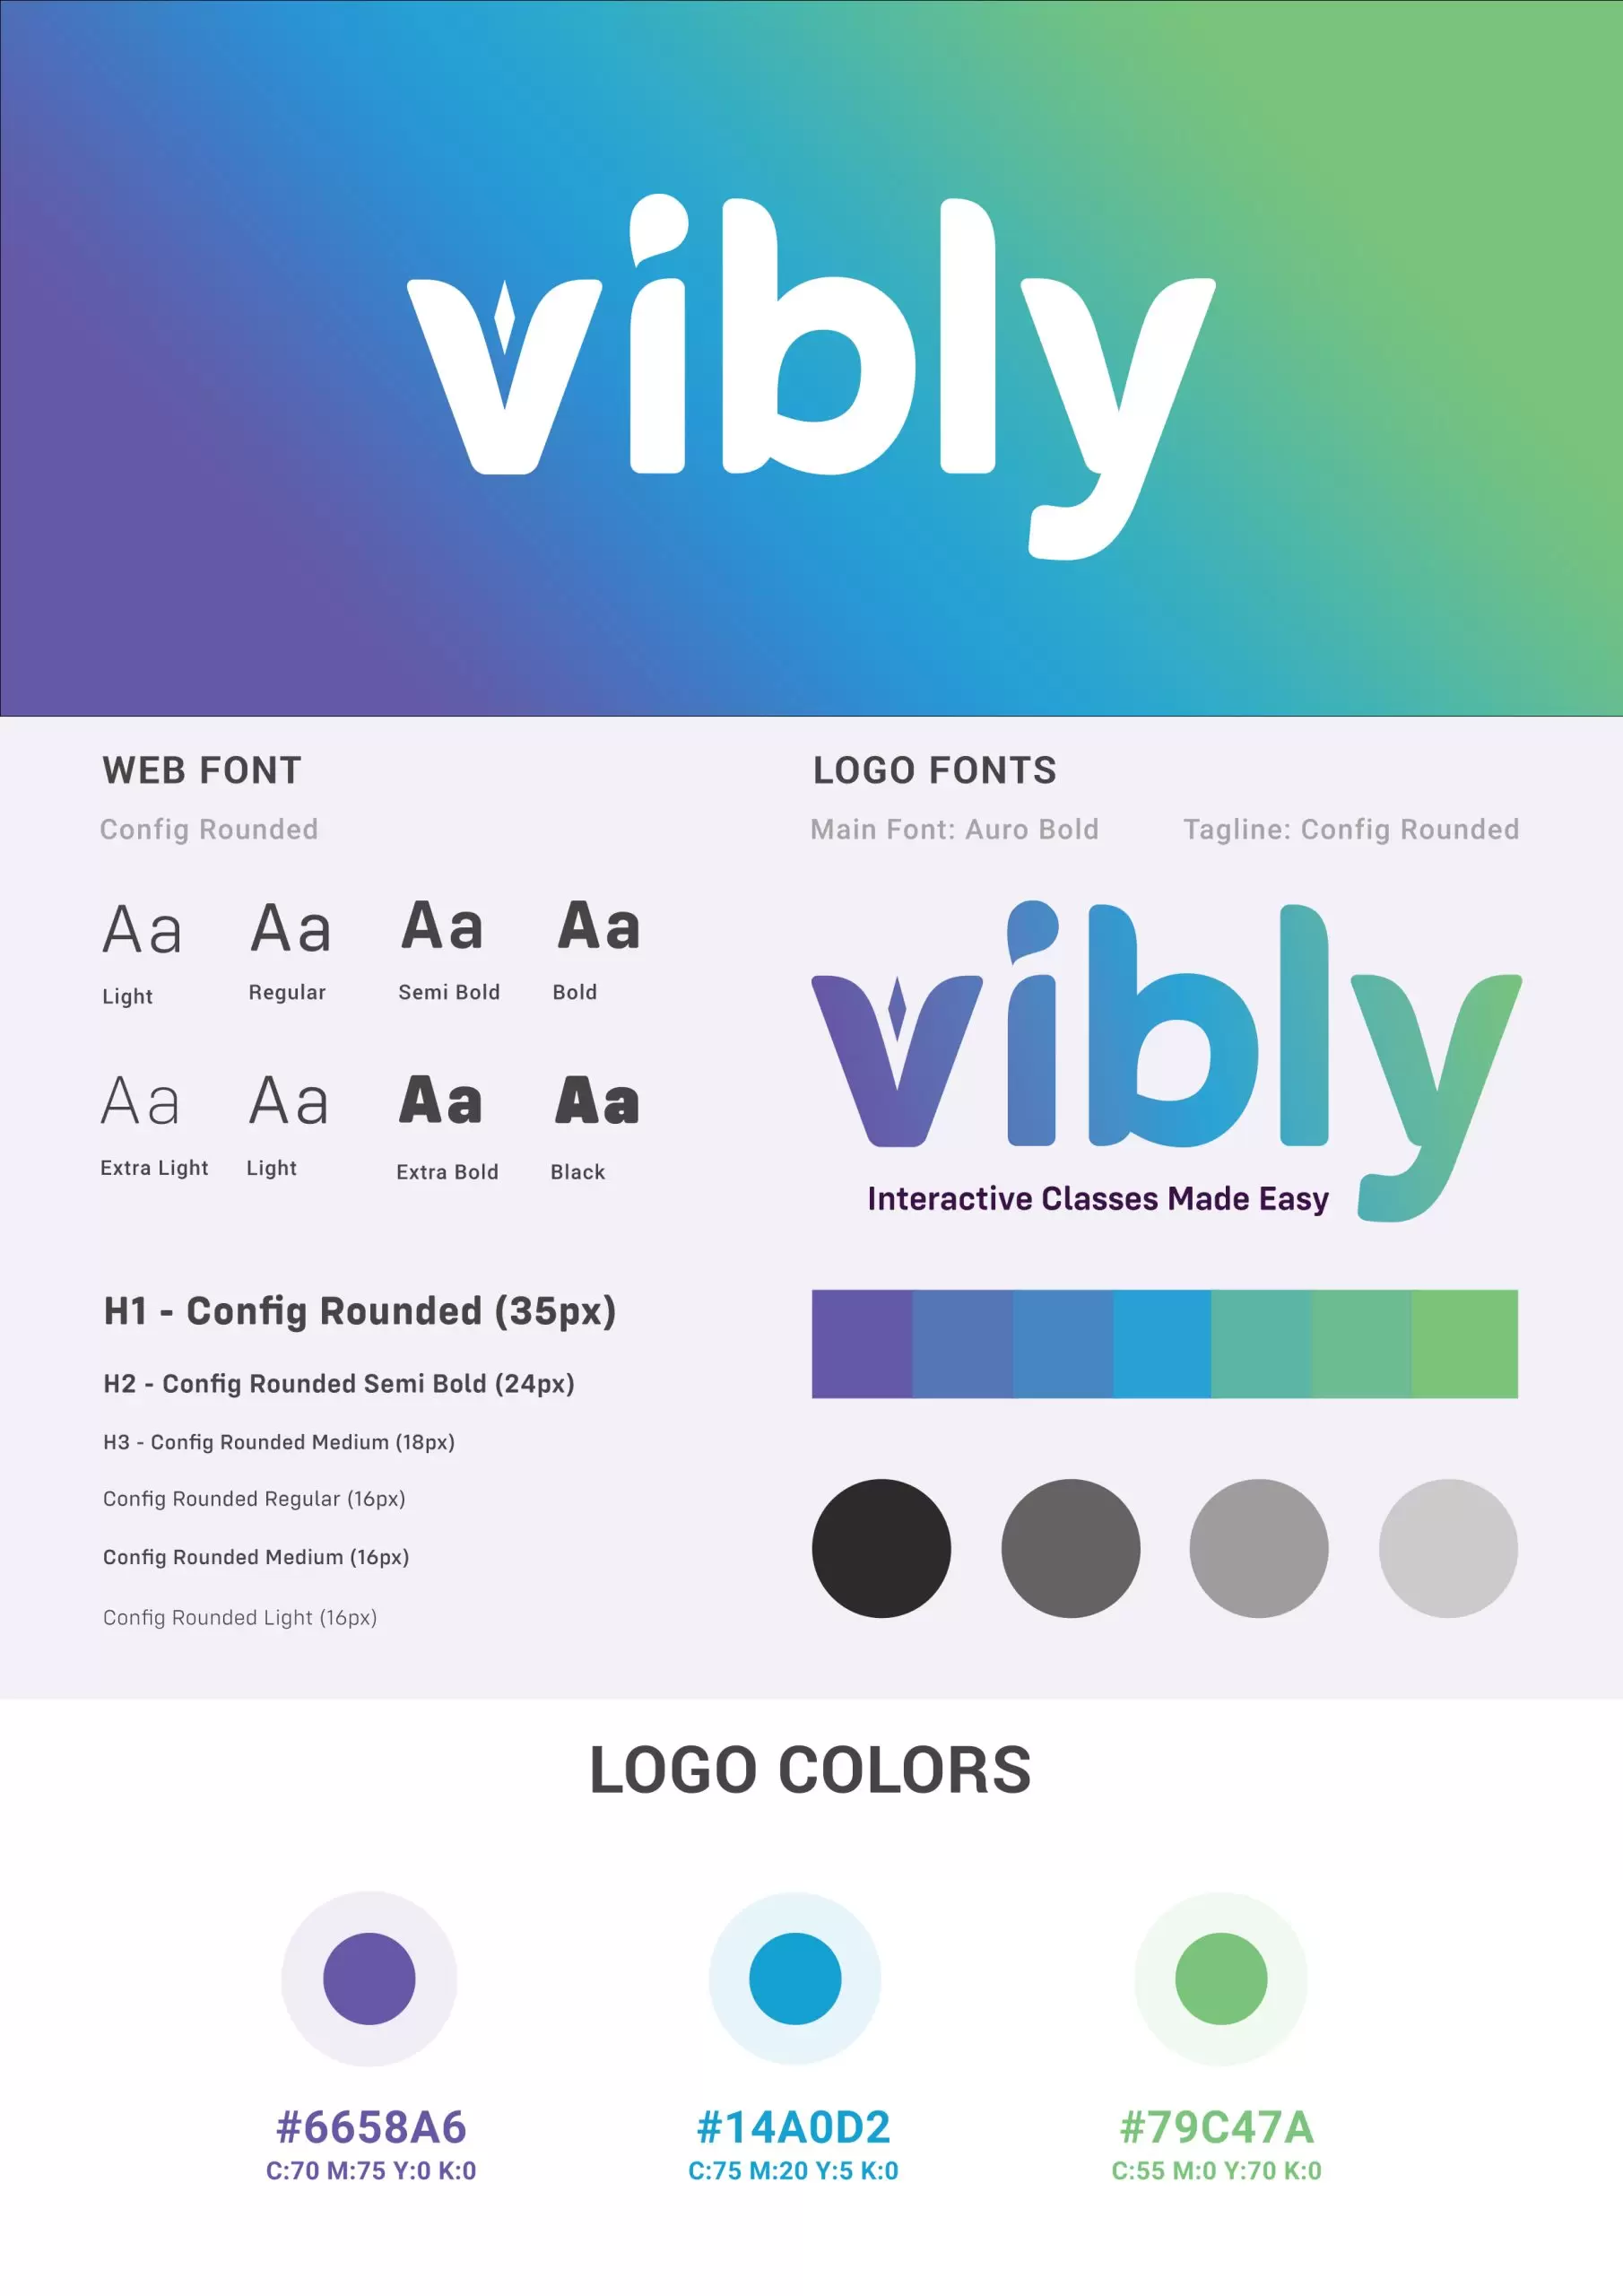 Vibly Brand Guidelines behance scaled.jpg